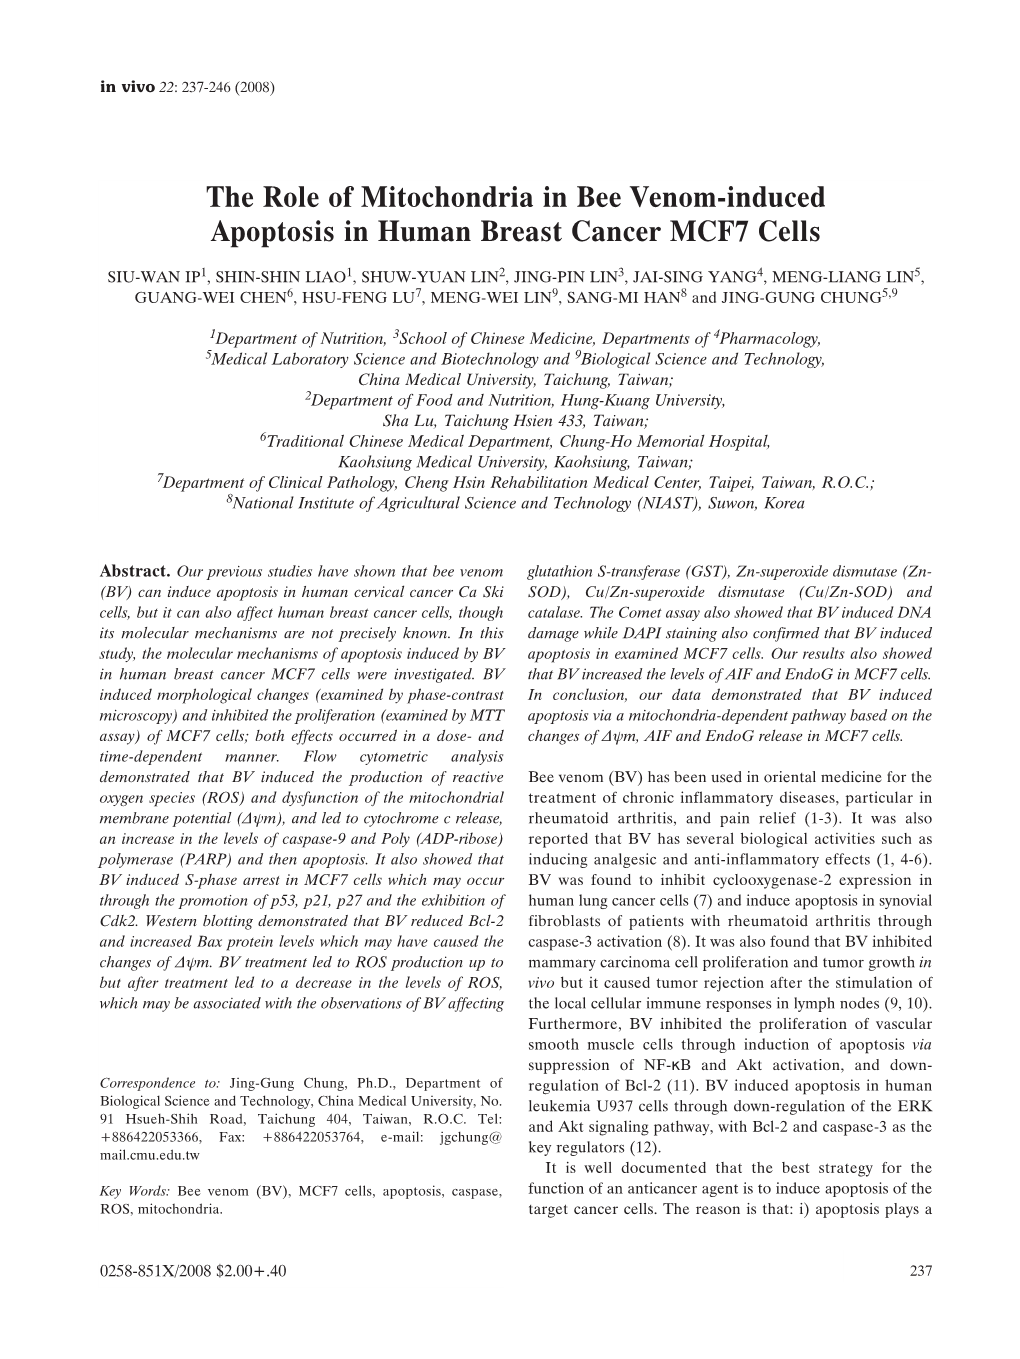 The Role of Mitochondria in Bee Venom-Induced Apoptosis in Human Breast Cancer MCF7 Cells